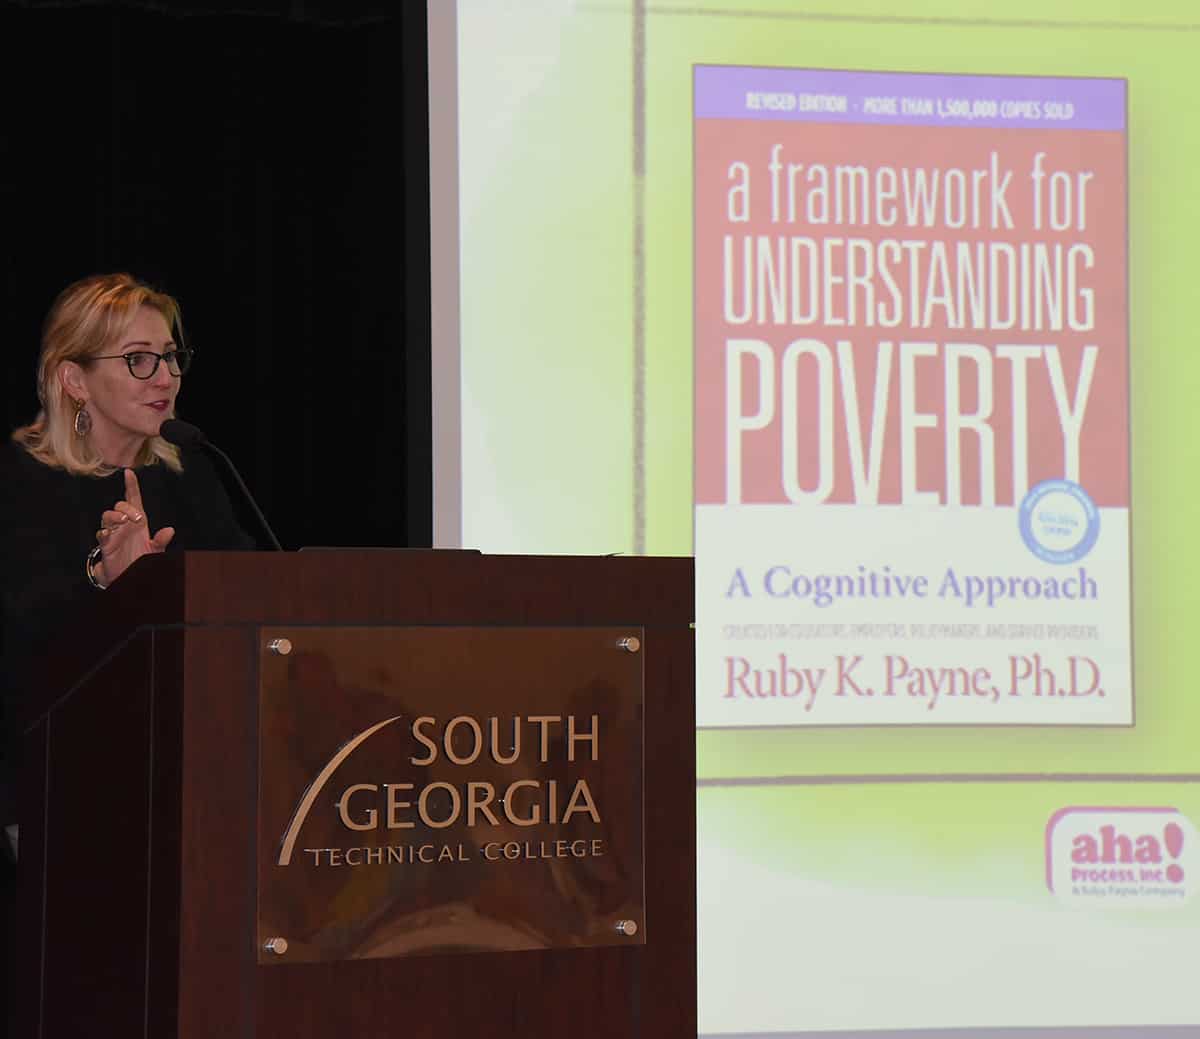 Dr. Ruby Payne is shown above conducting a professional development workshop for educators at South Georgia Technical College.